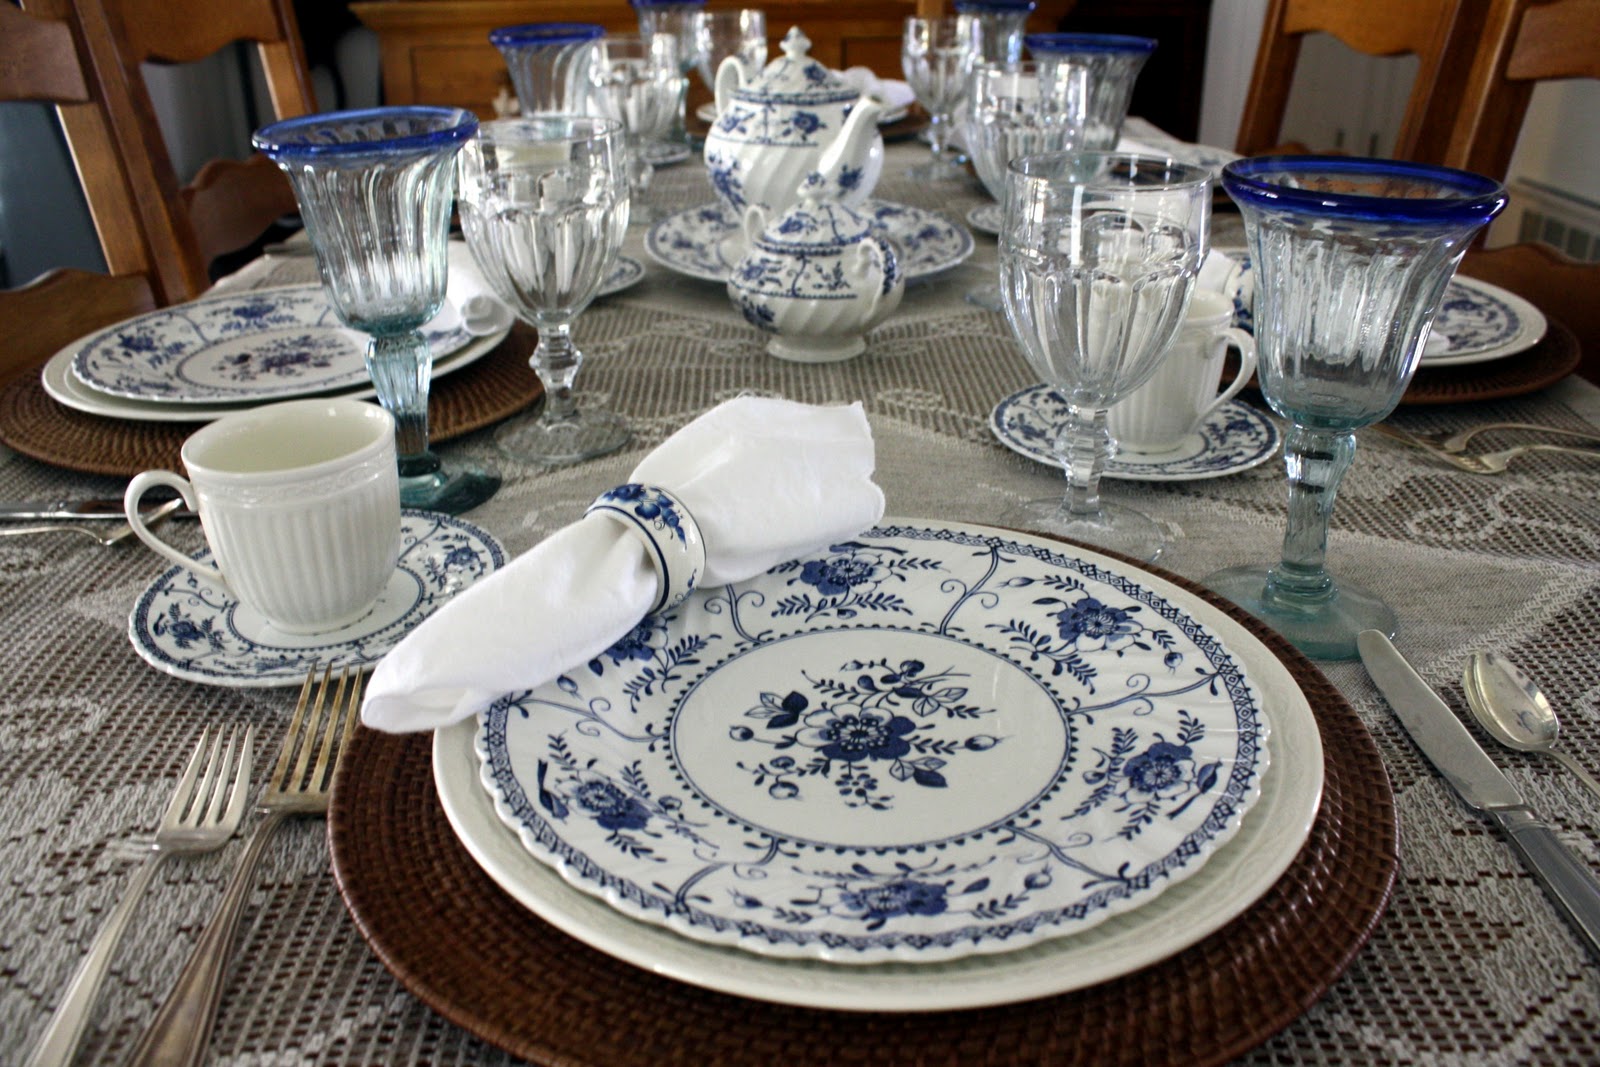 Life with the Mozas: Blue and White patterns make the table